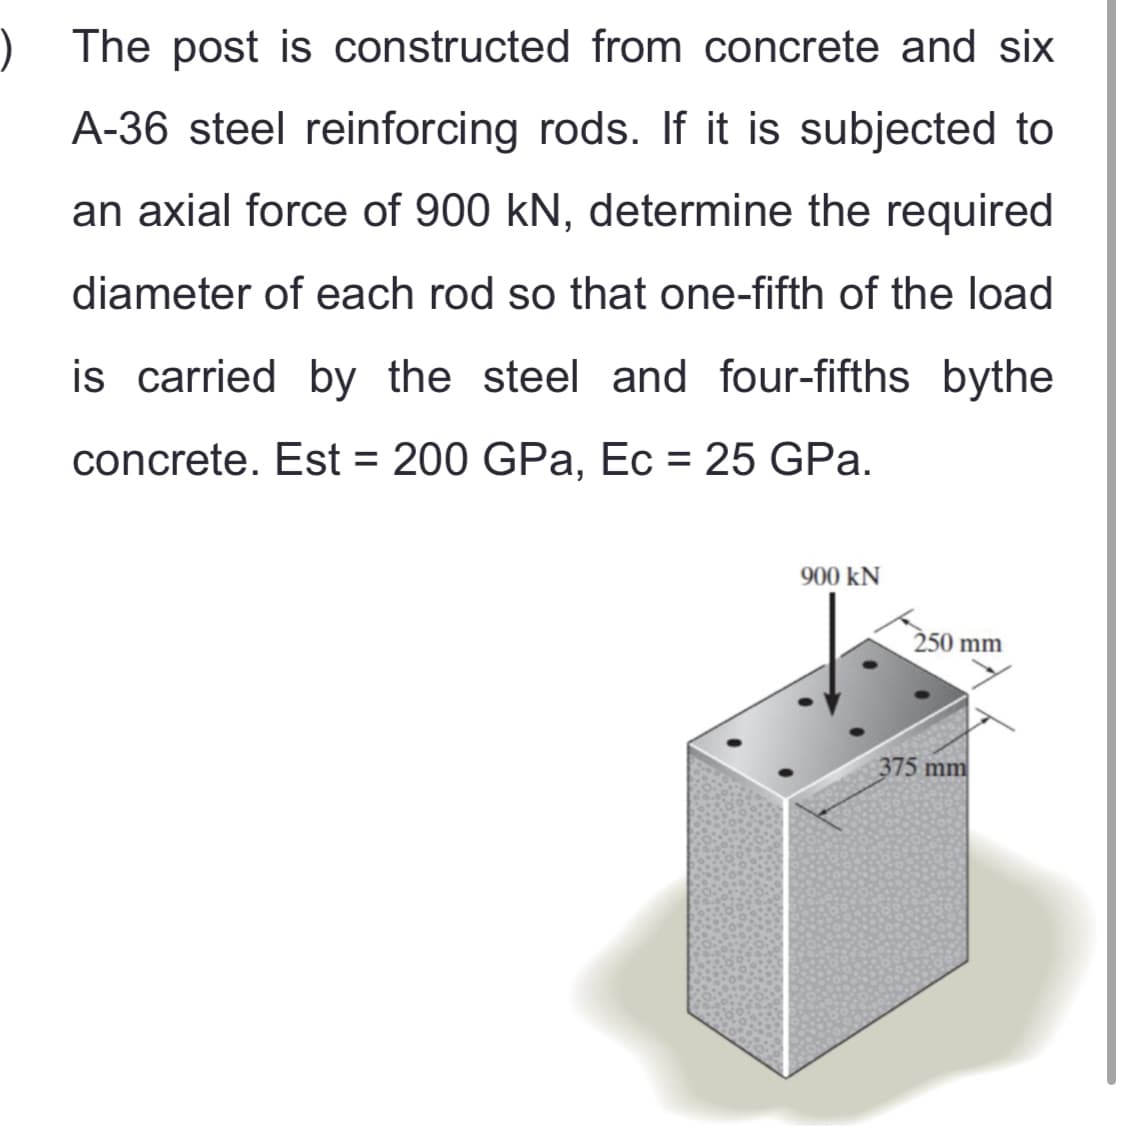 ) The post is constructed from concrete and six
A-36 steel reinforcing rods. If it is subjected to
an axial force of 900 kN, determine the required
diameter of each rod so that one-fifth of the load
is carried by the steel and four-fifths bythe
concrete. Est = 200 GPa, Ec = 25 GPa.
900 kN
250 mm
375 mm
